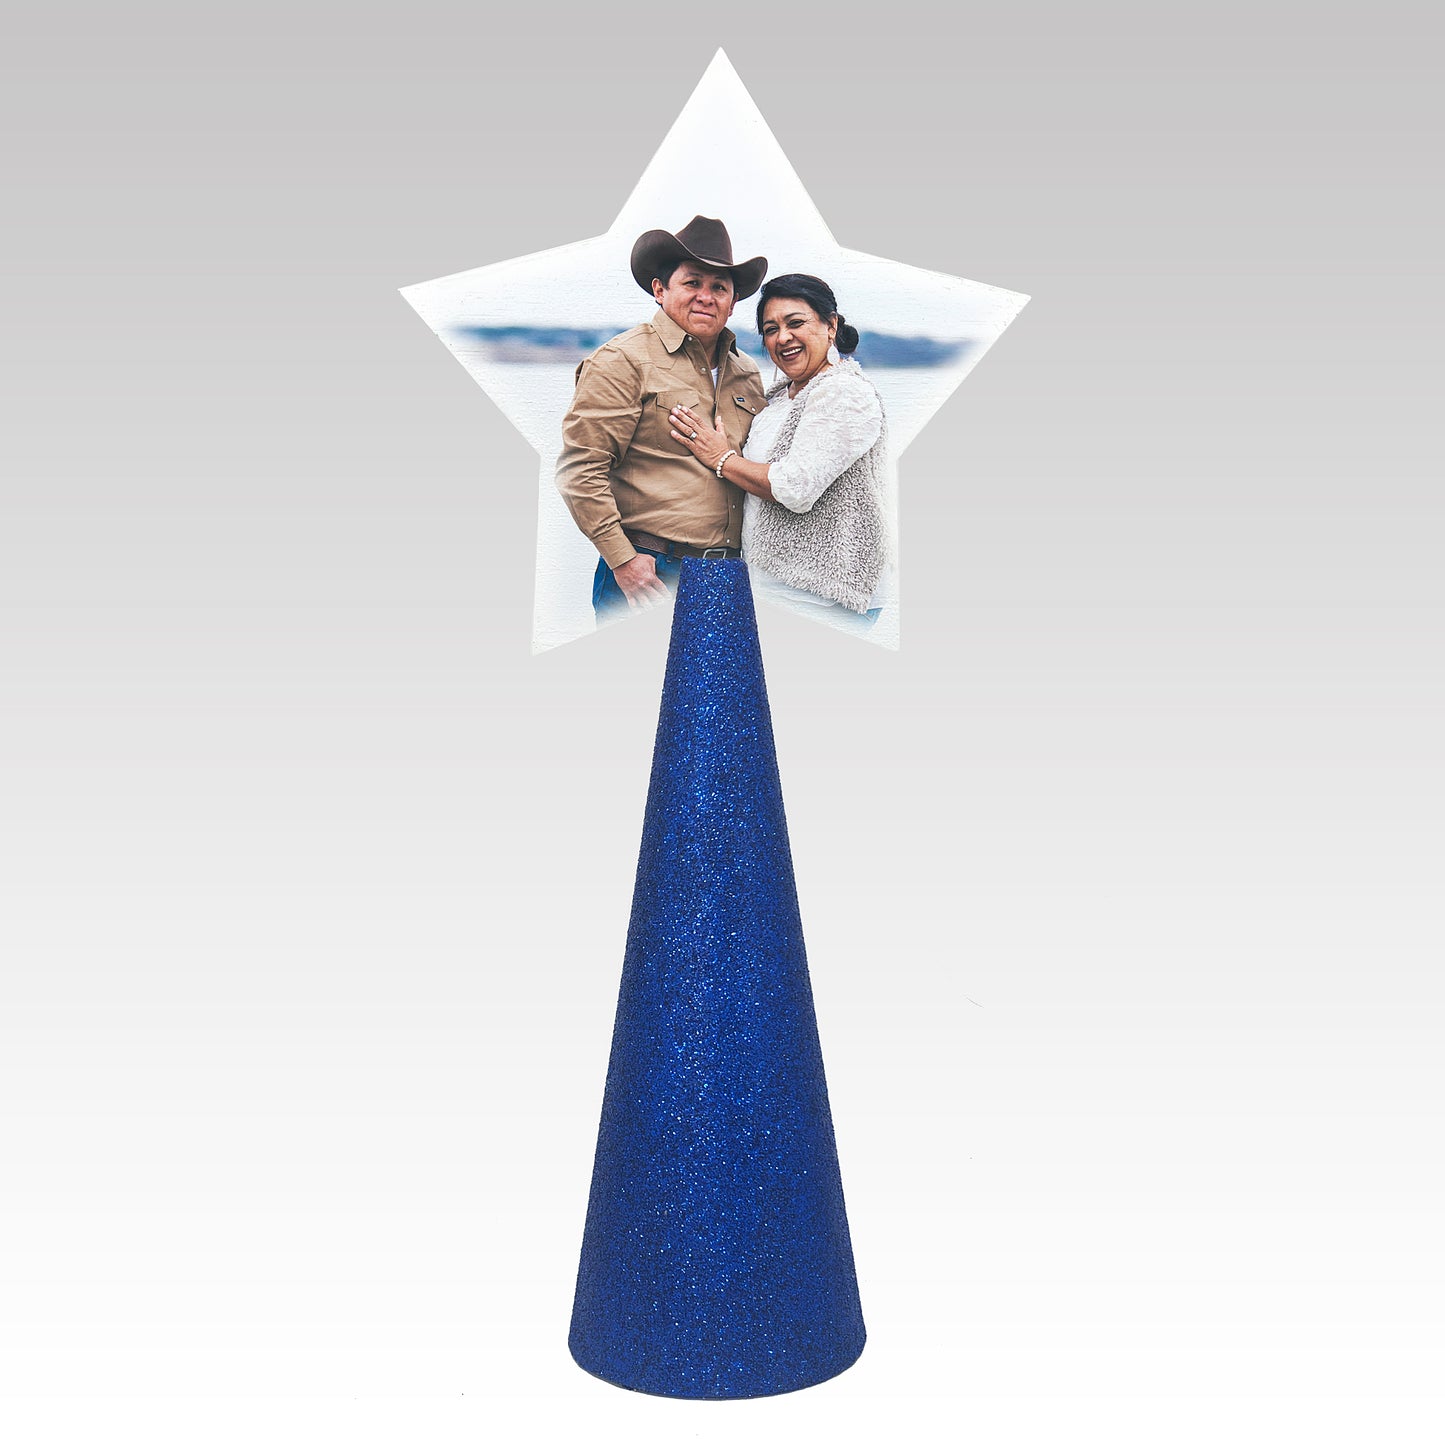 Custom tree topper - White Star with sample couple photo - royal blue glitter cone